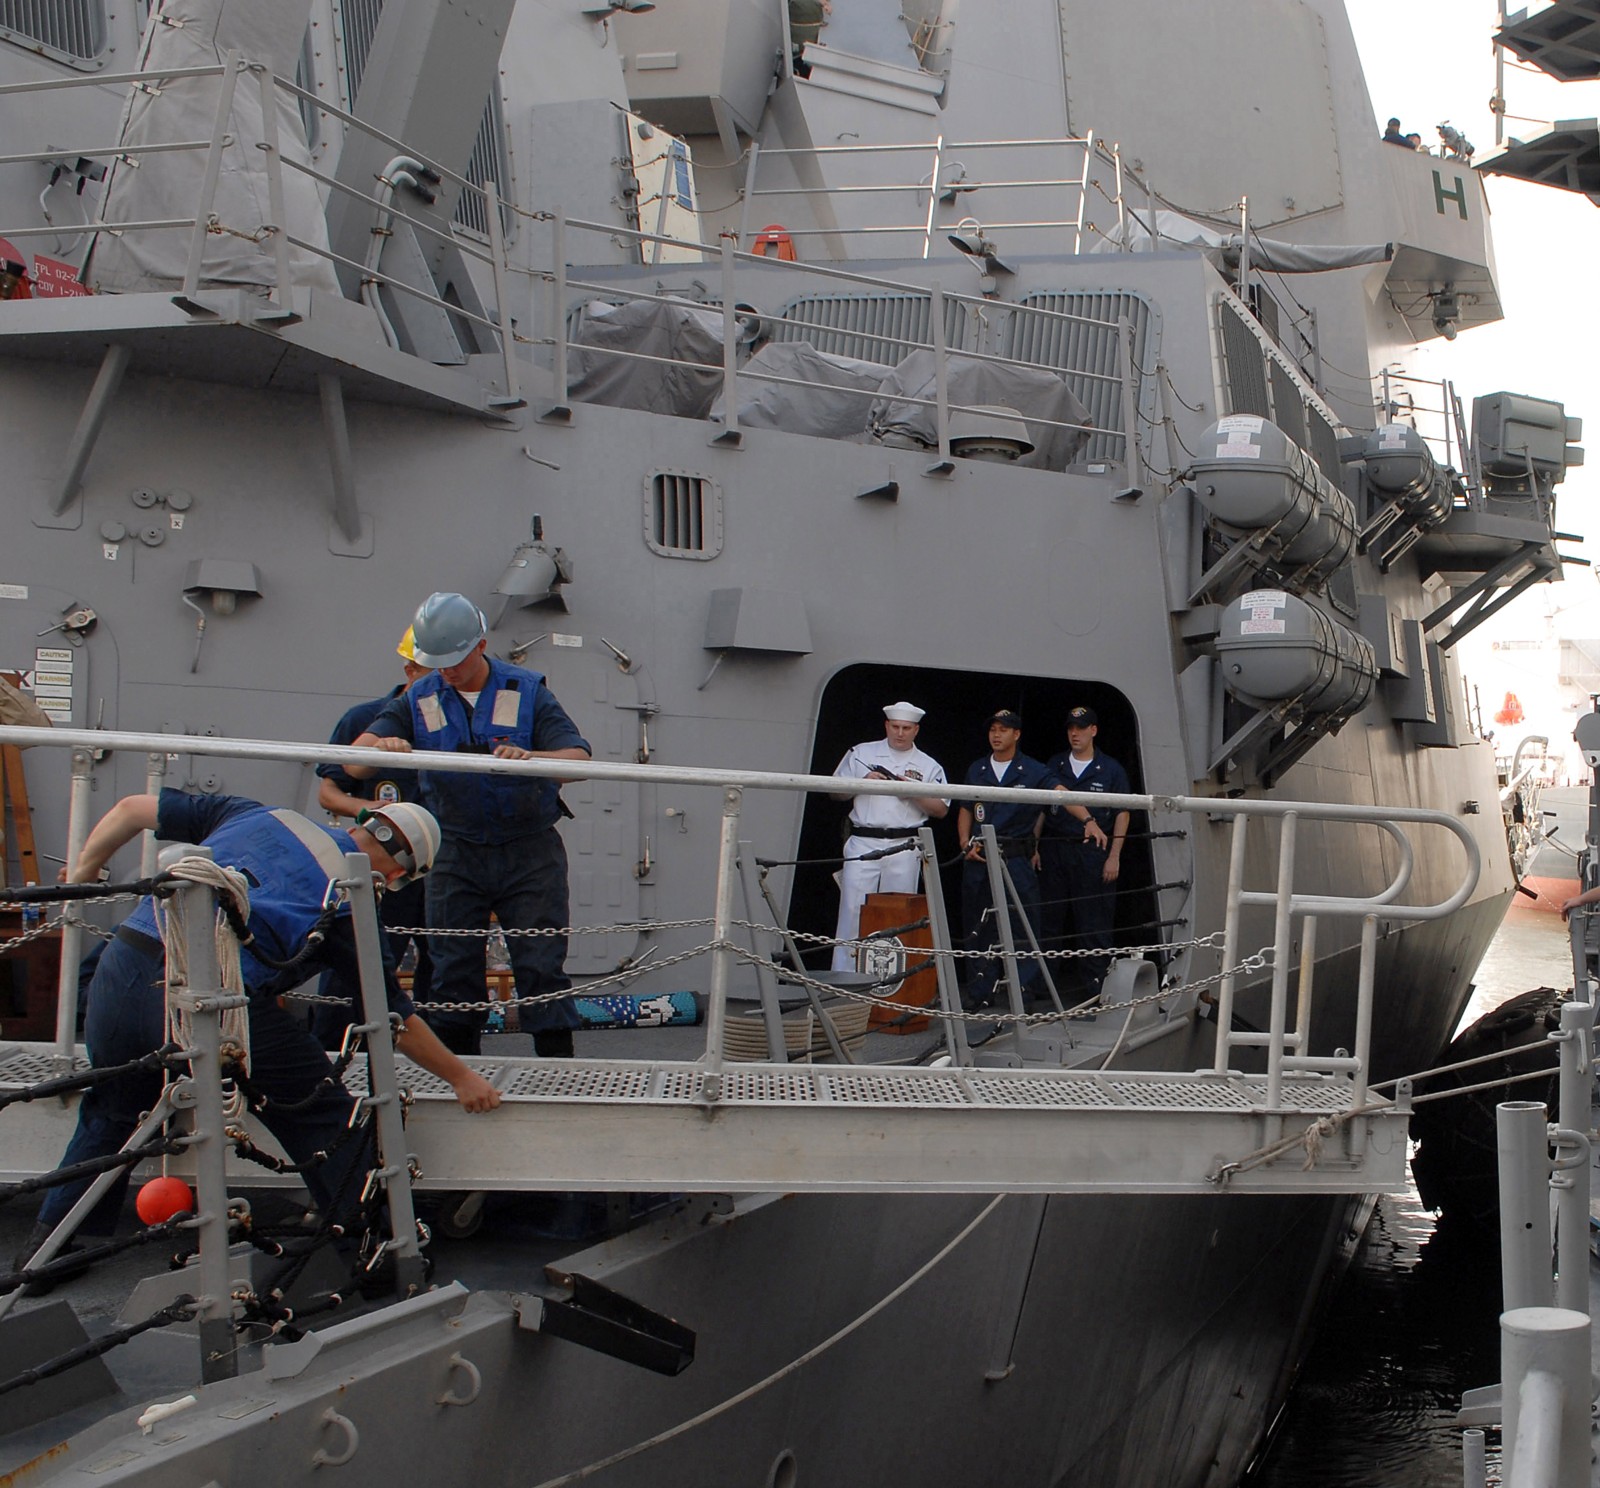 ddg-101 uss gridley arleigh burke class guided missile destroyer aegis us navy goa india 38